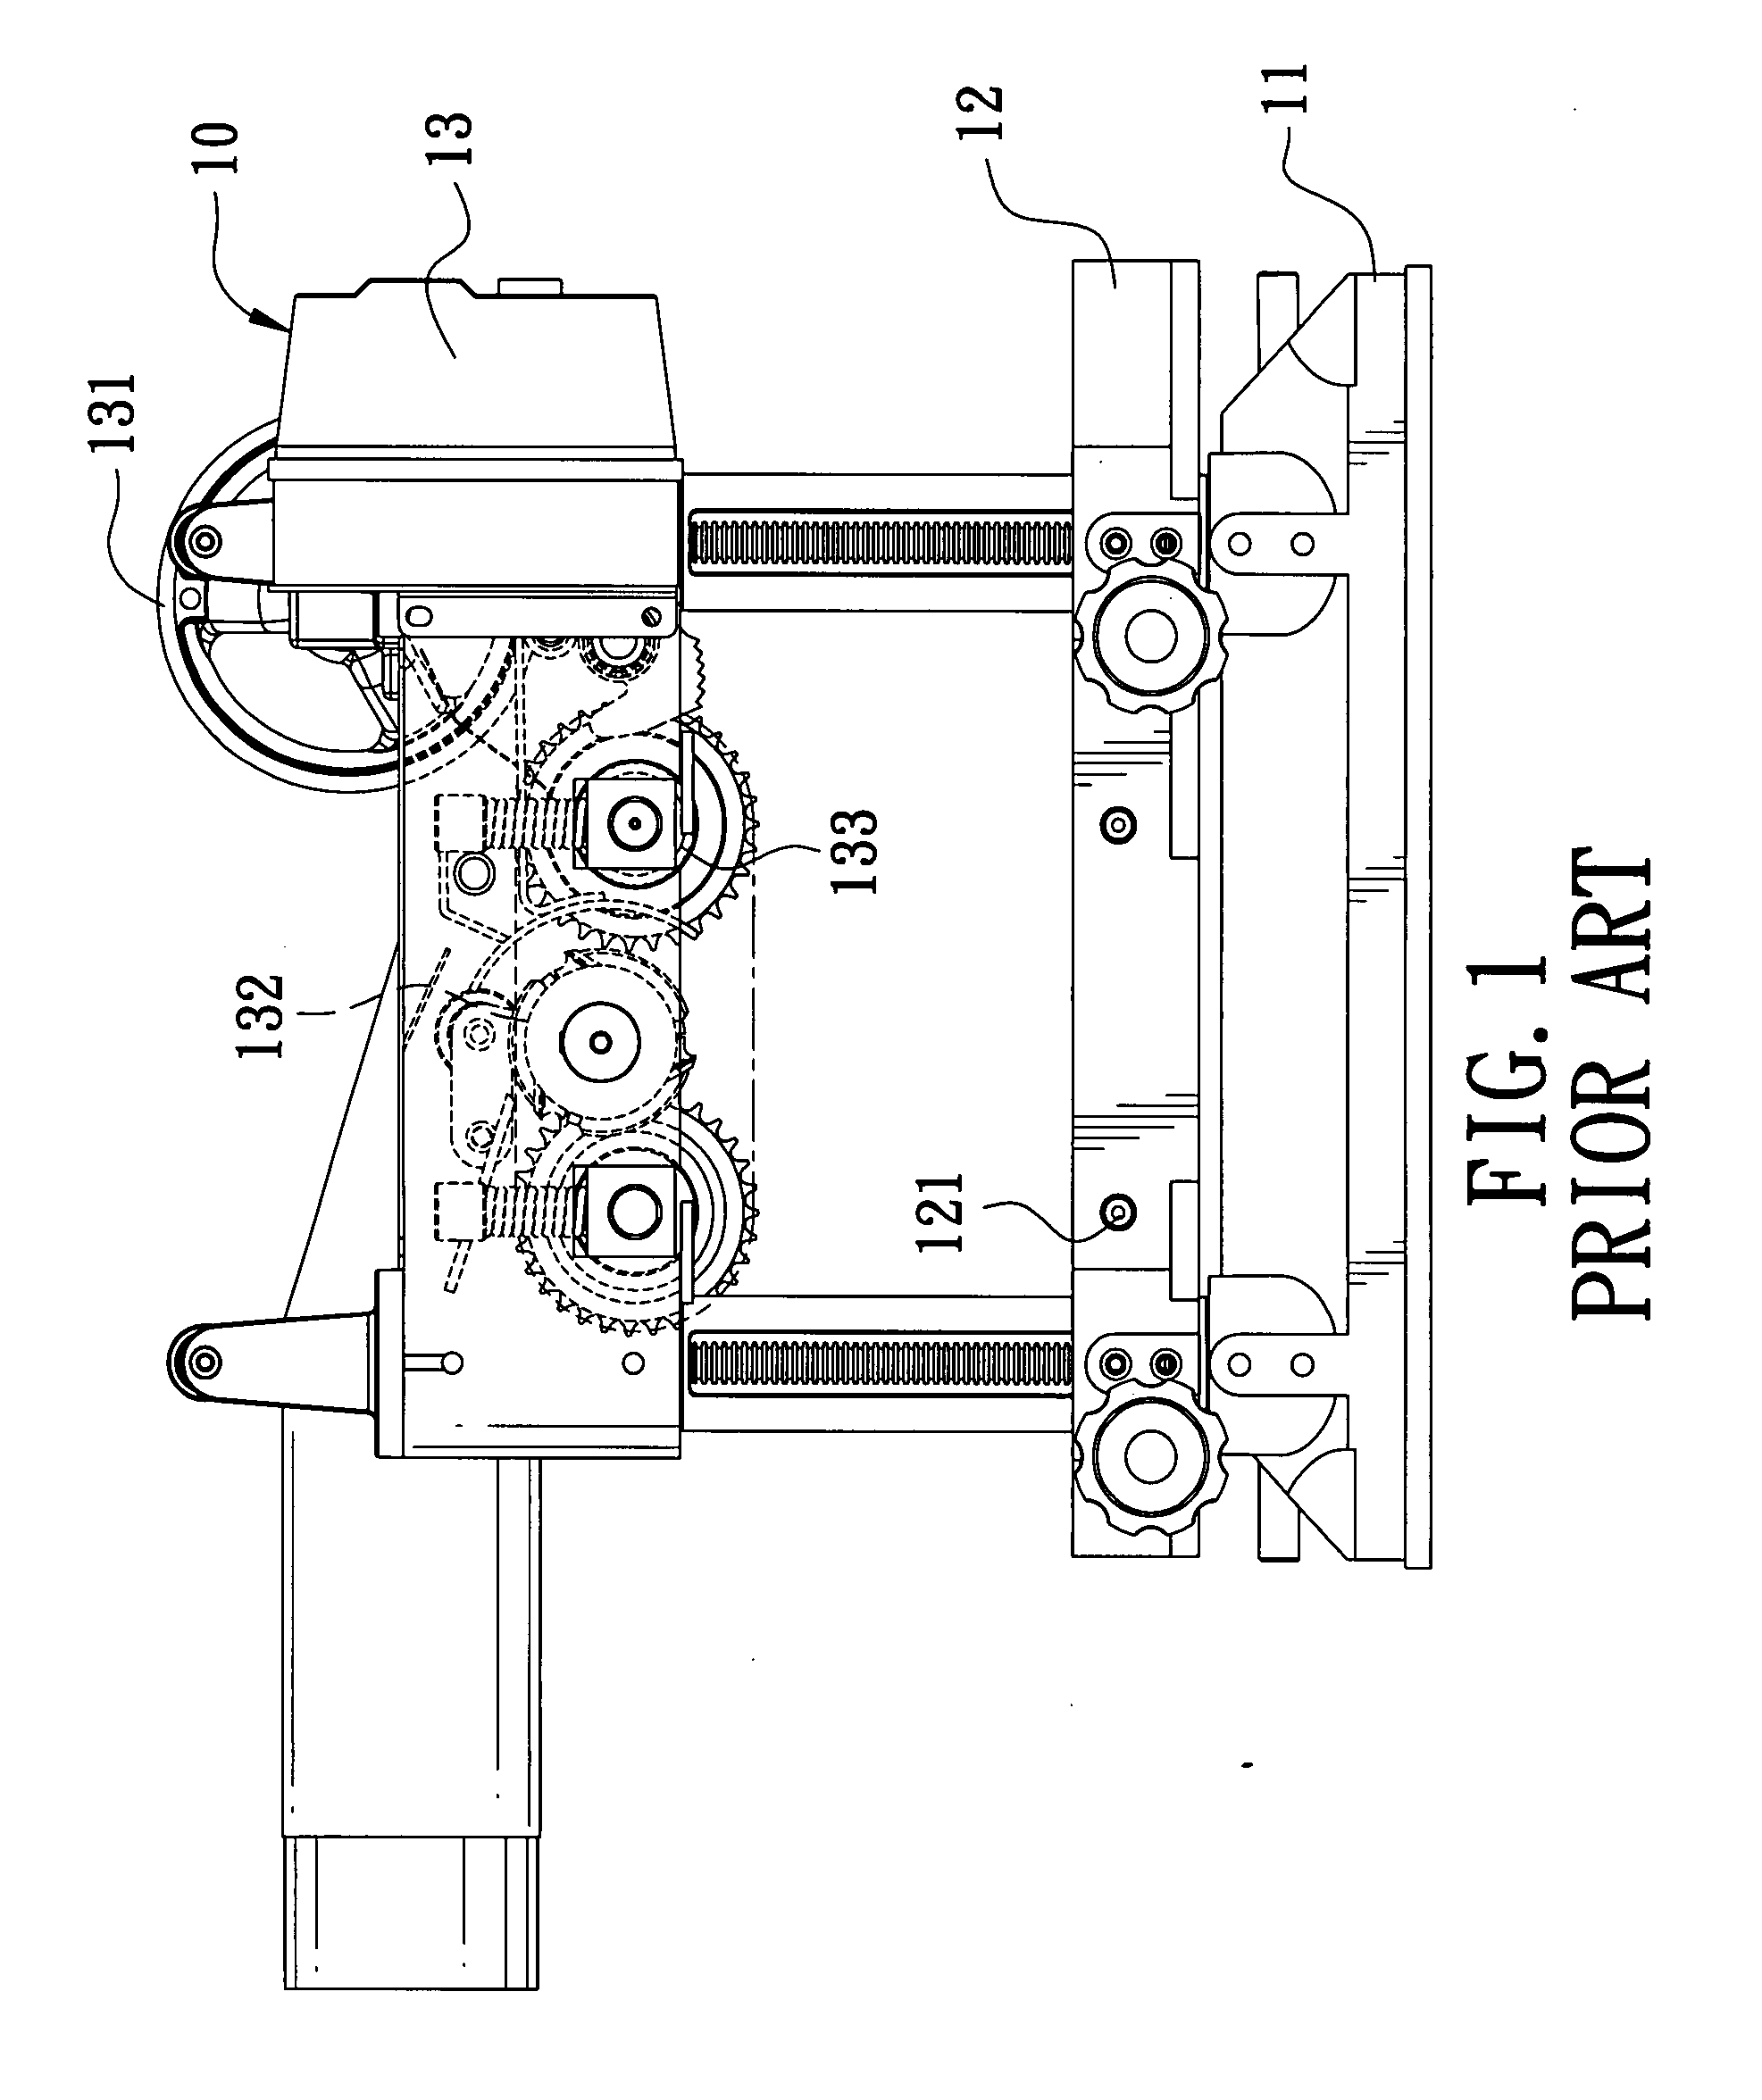 Work feeding and conveying mechanism for a planing machine